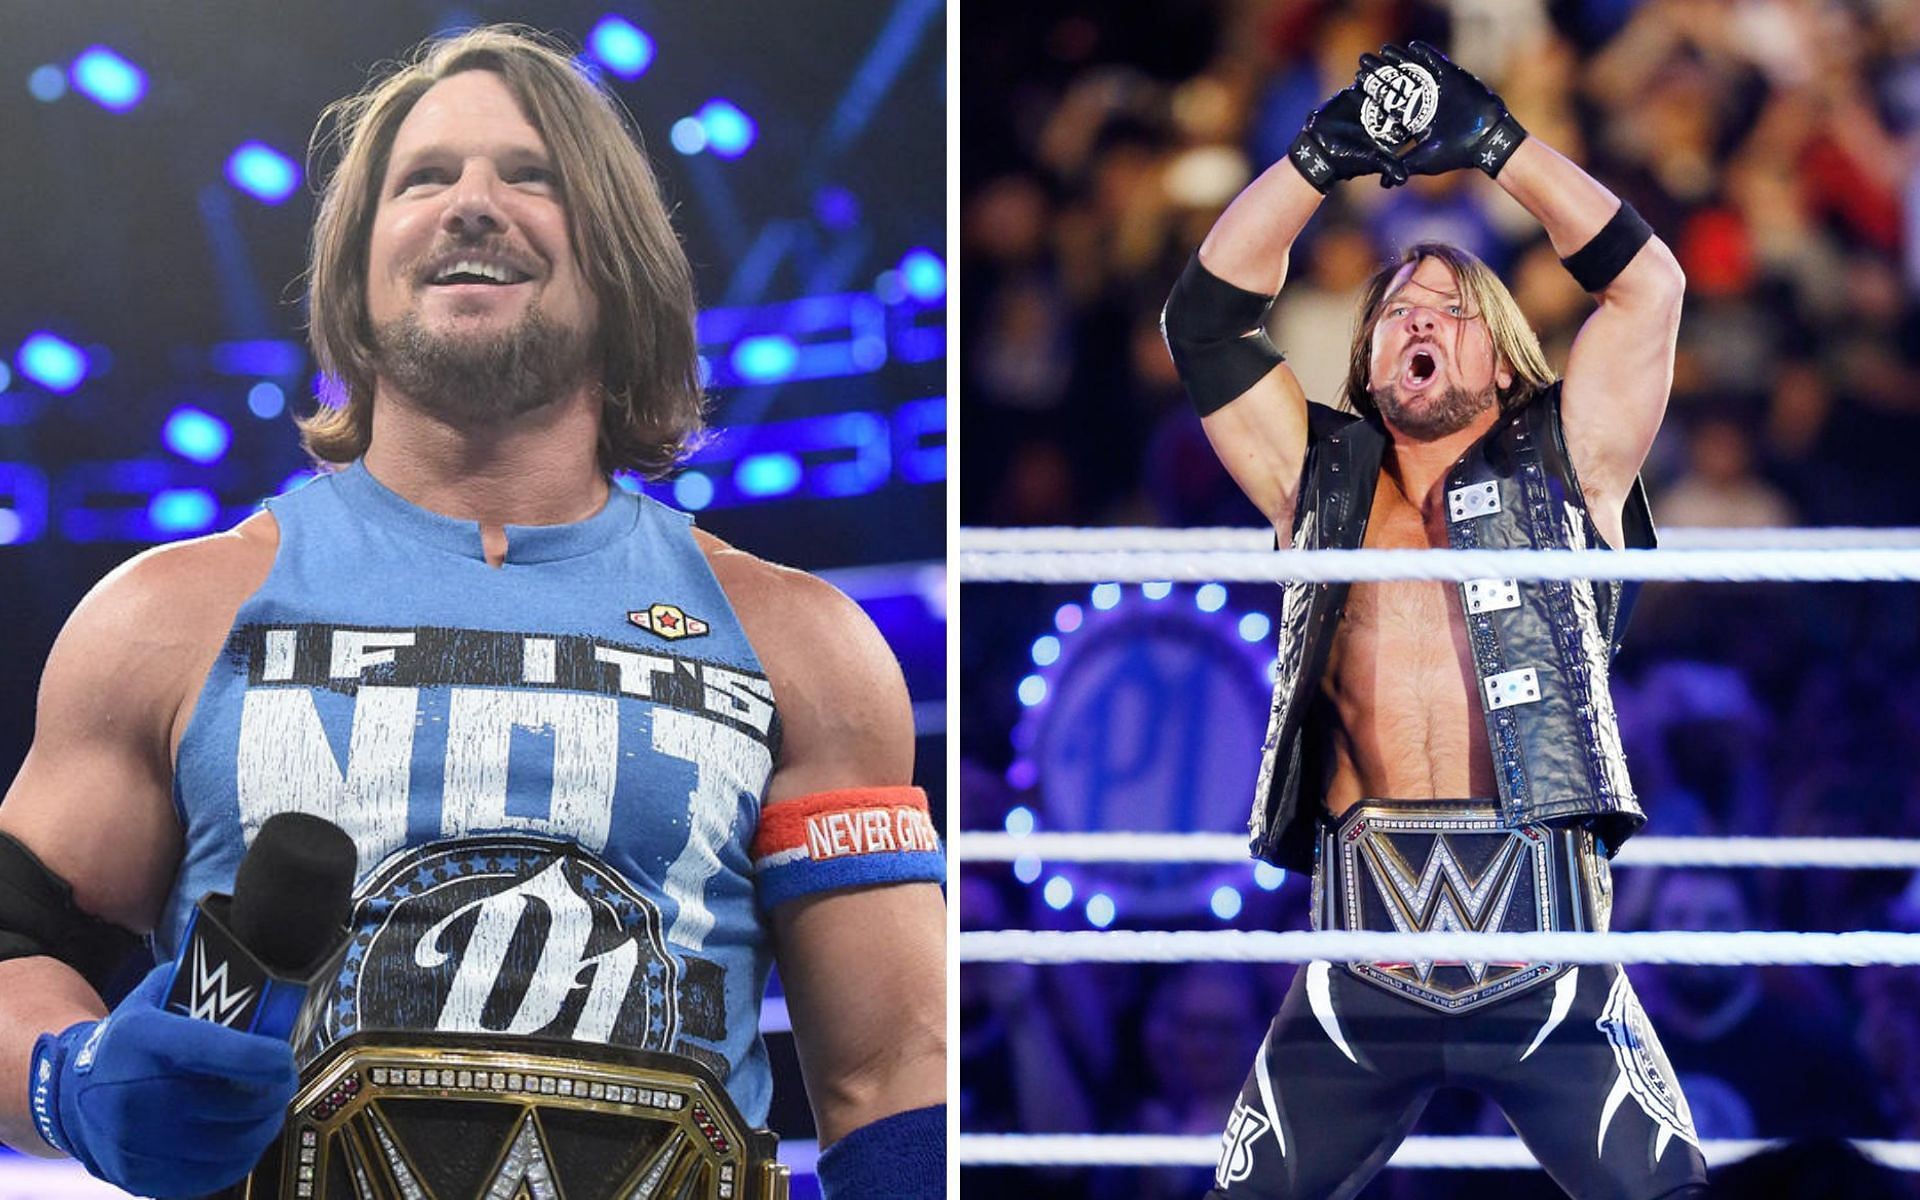 Former WWE Champion names AJ Styles best in business